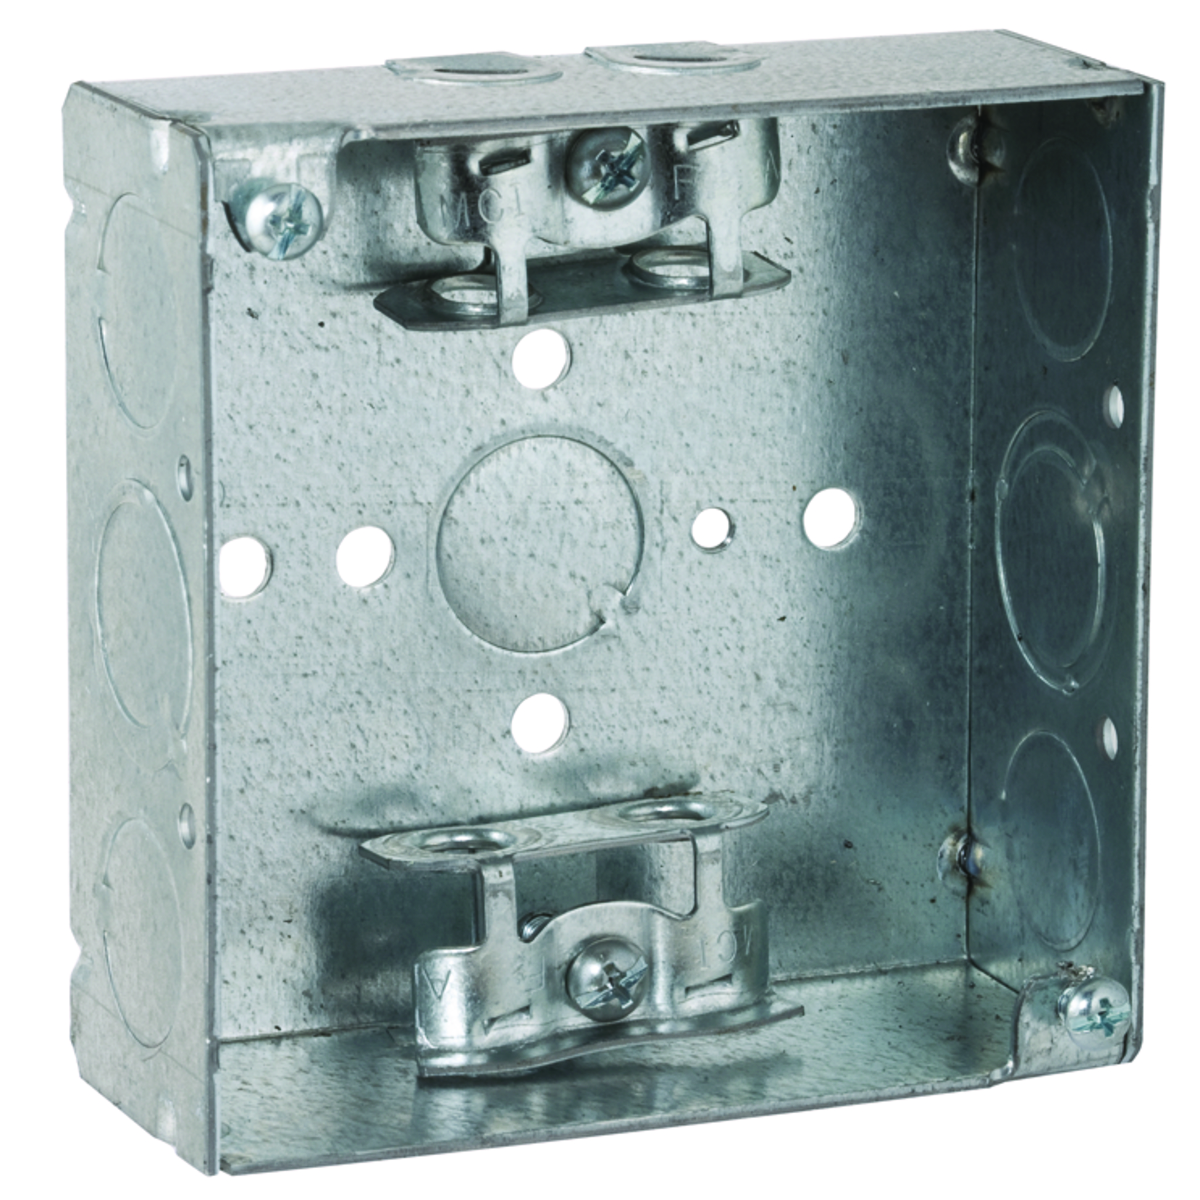 4 In. Square Boxes, 1-1/2 In. Deep - Welded with AC/MC/Flex Clamps,600V